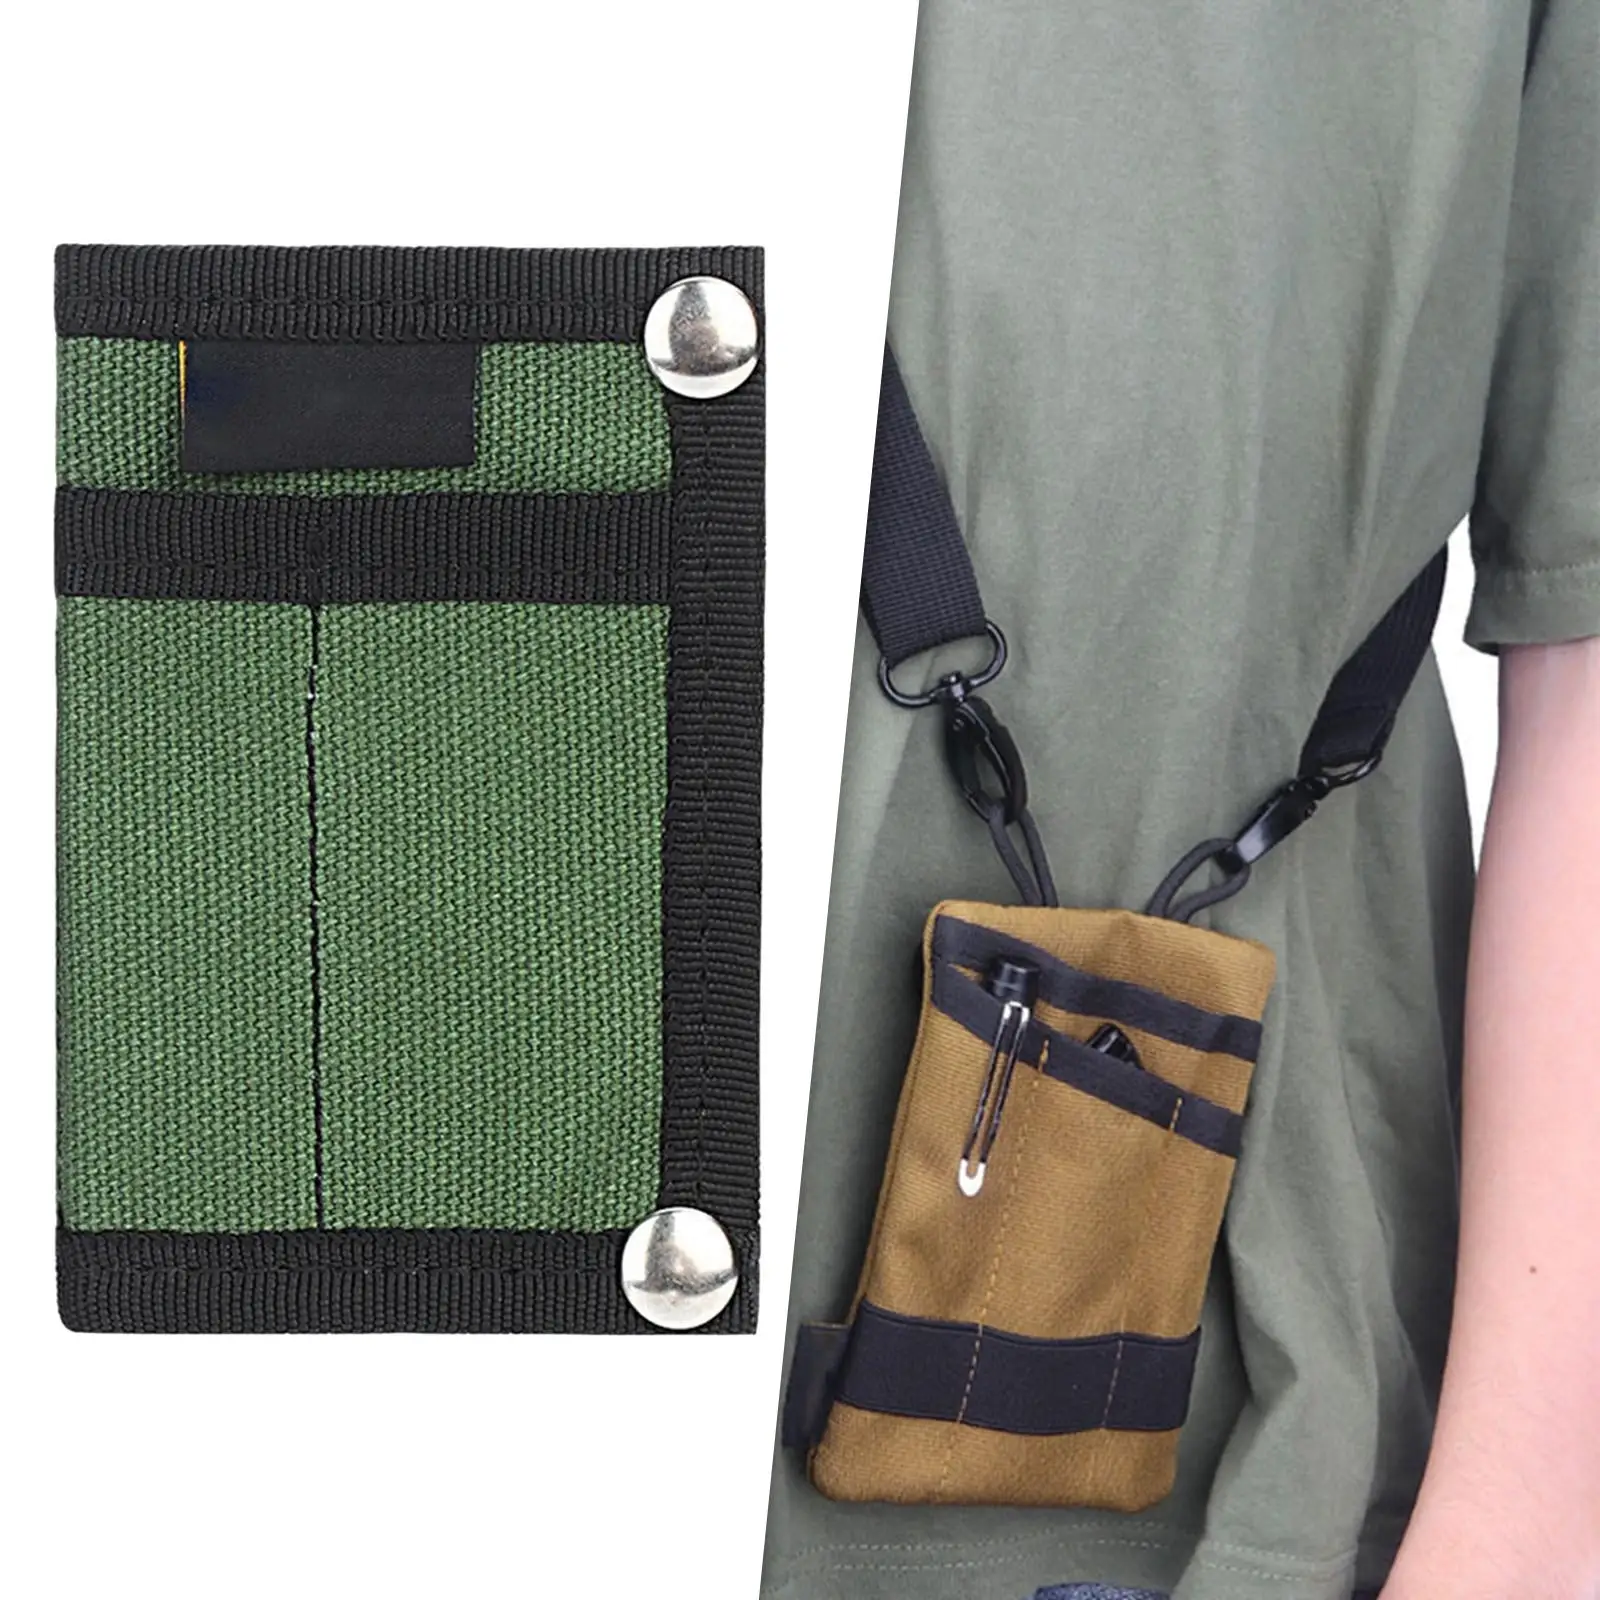 Multifunctional EDC Organizer Tactical Pouch Pouch Storage Bag Pocket Organizer for Hunting